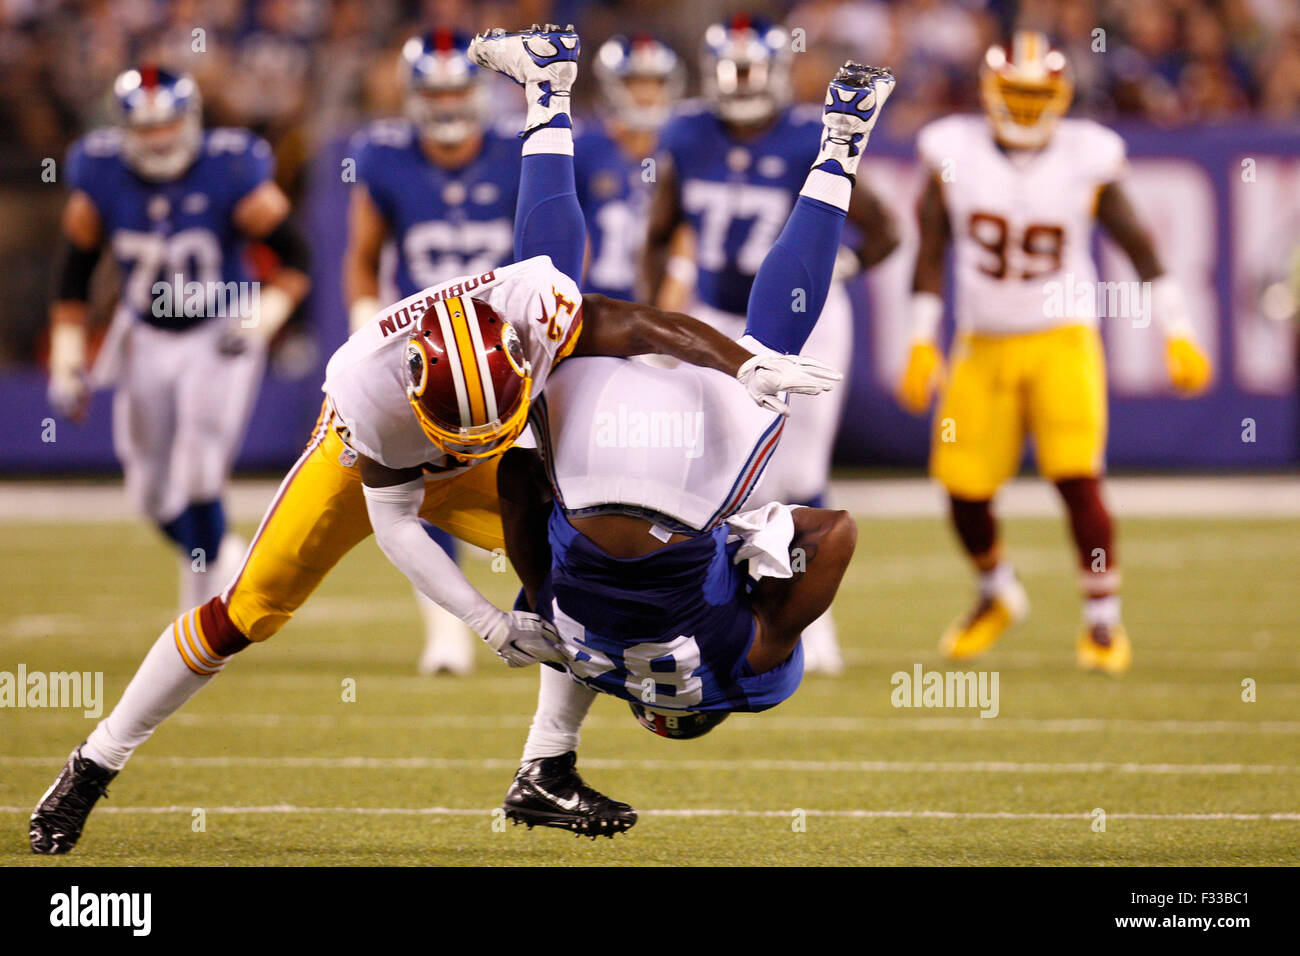 September 24, 2015, New York Giants tight end Larry Donnell (84) gets flipped by Washington Redskins strong safety Trenton Robinson (34) after catching the ball during the NFL game between the Washington Redskins and the New York Giants at MetLife Stadium in East Rutherford, New Jersey. The New York Giants won 32-21. Christopher Szagola/CSM Stock Photo